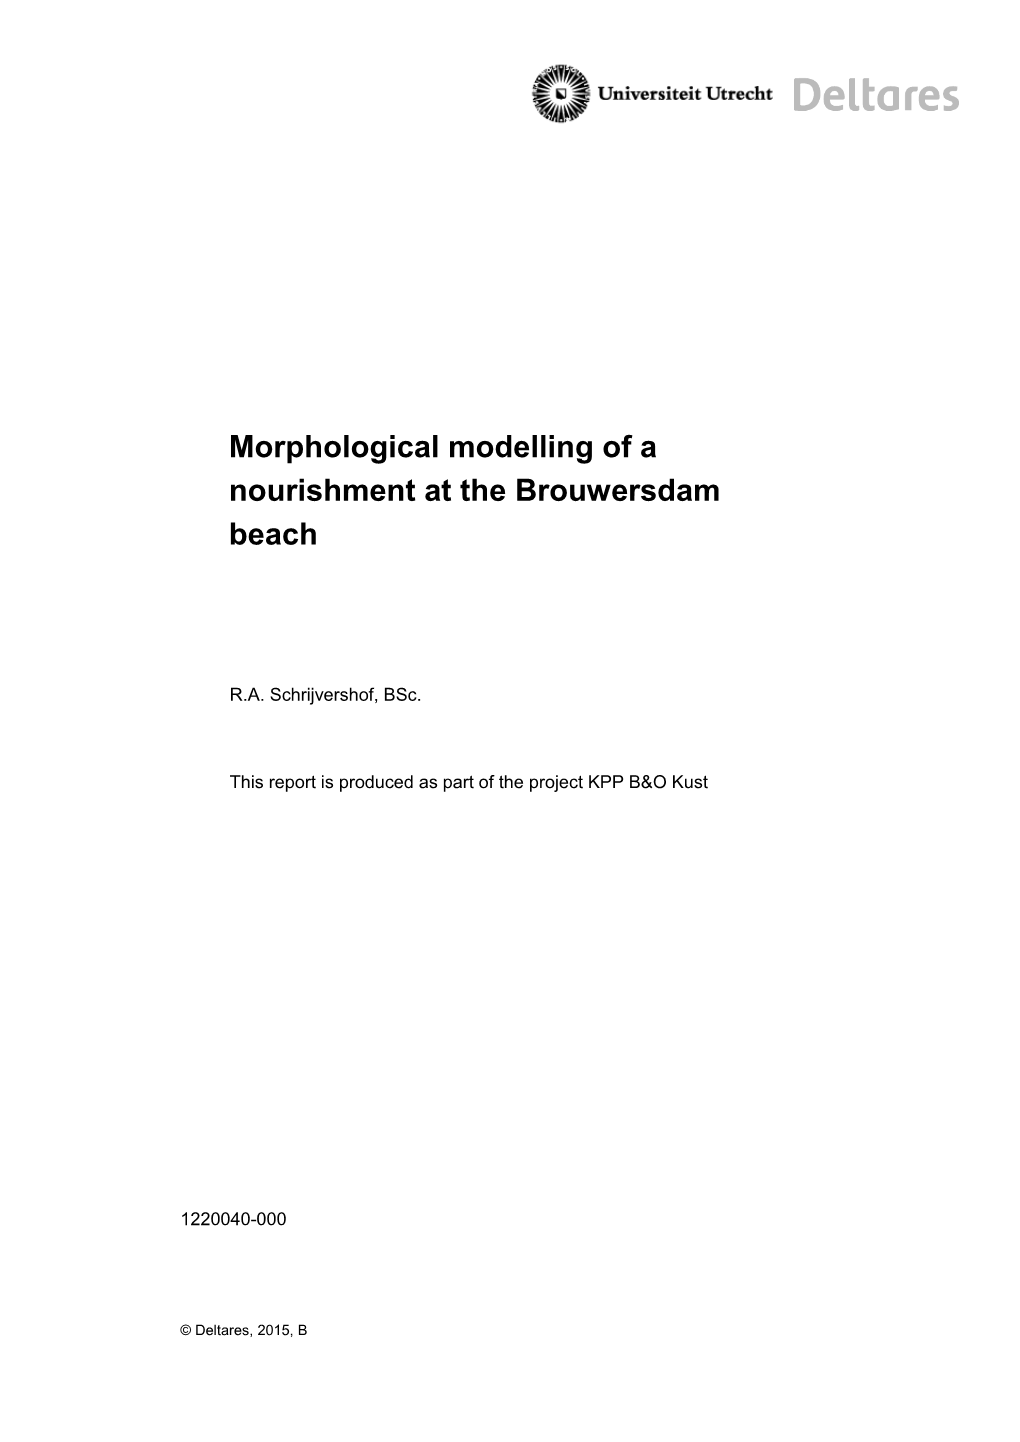 Morphological Modelling of a Nourishment at the Brouwersdam Beach